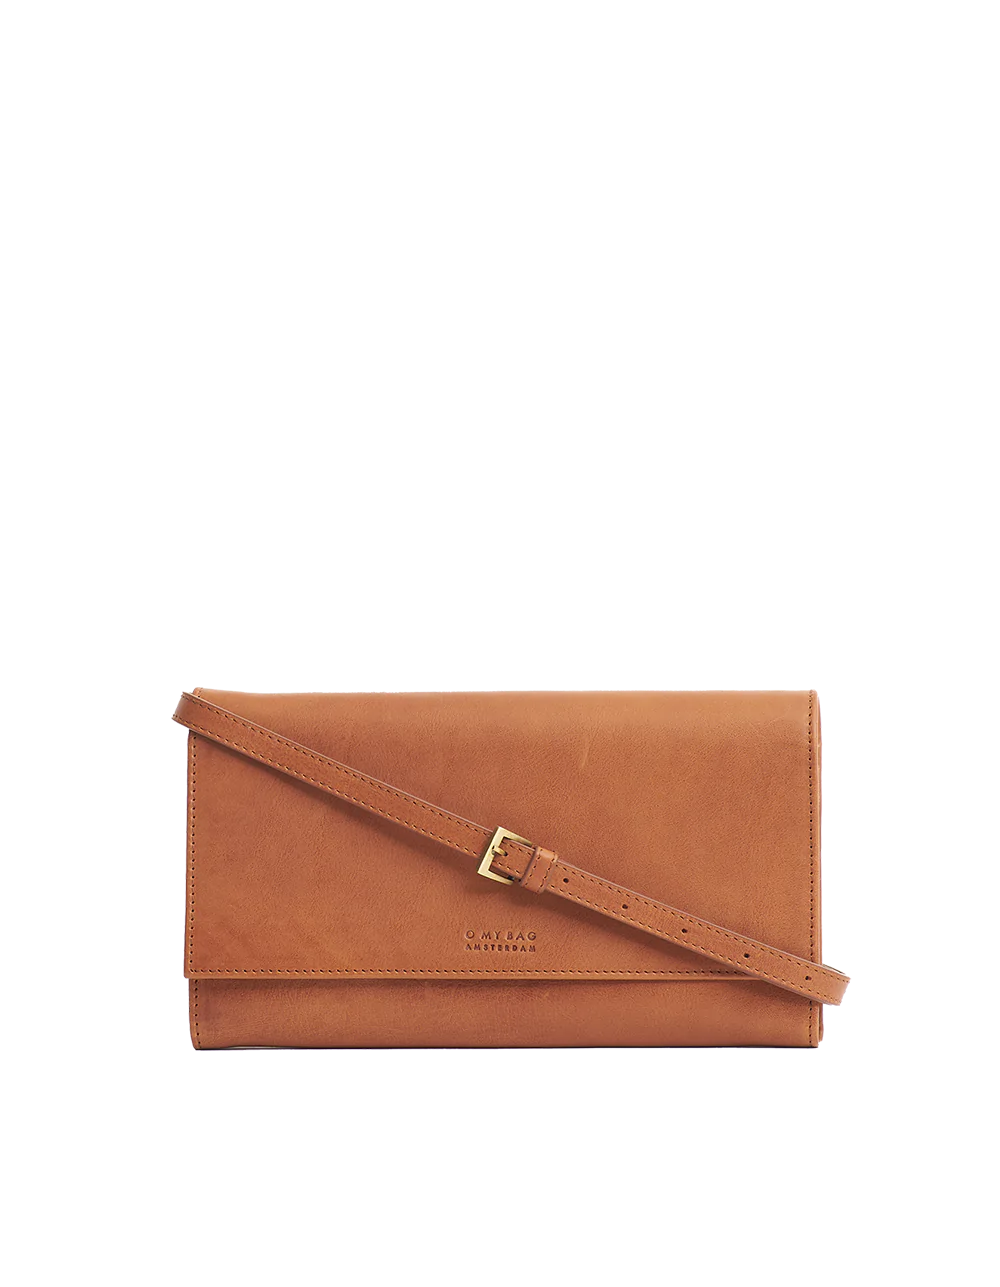 O MY BAG - Kirsty Clutch Large wallet with removable strap